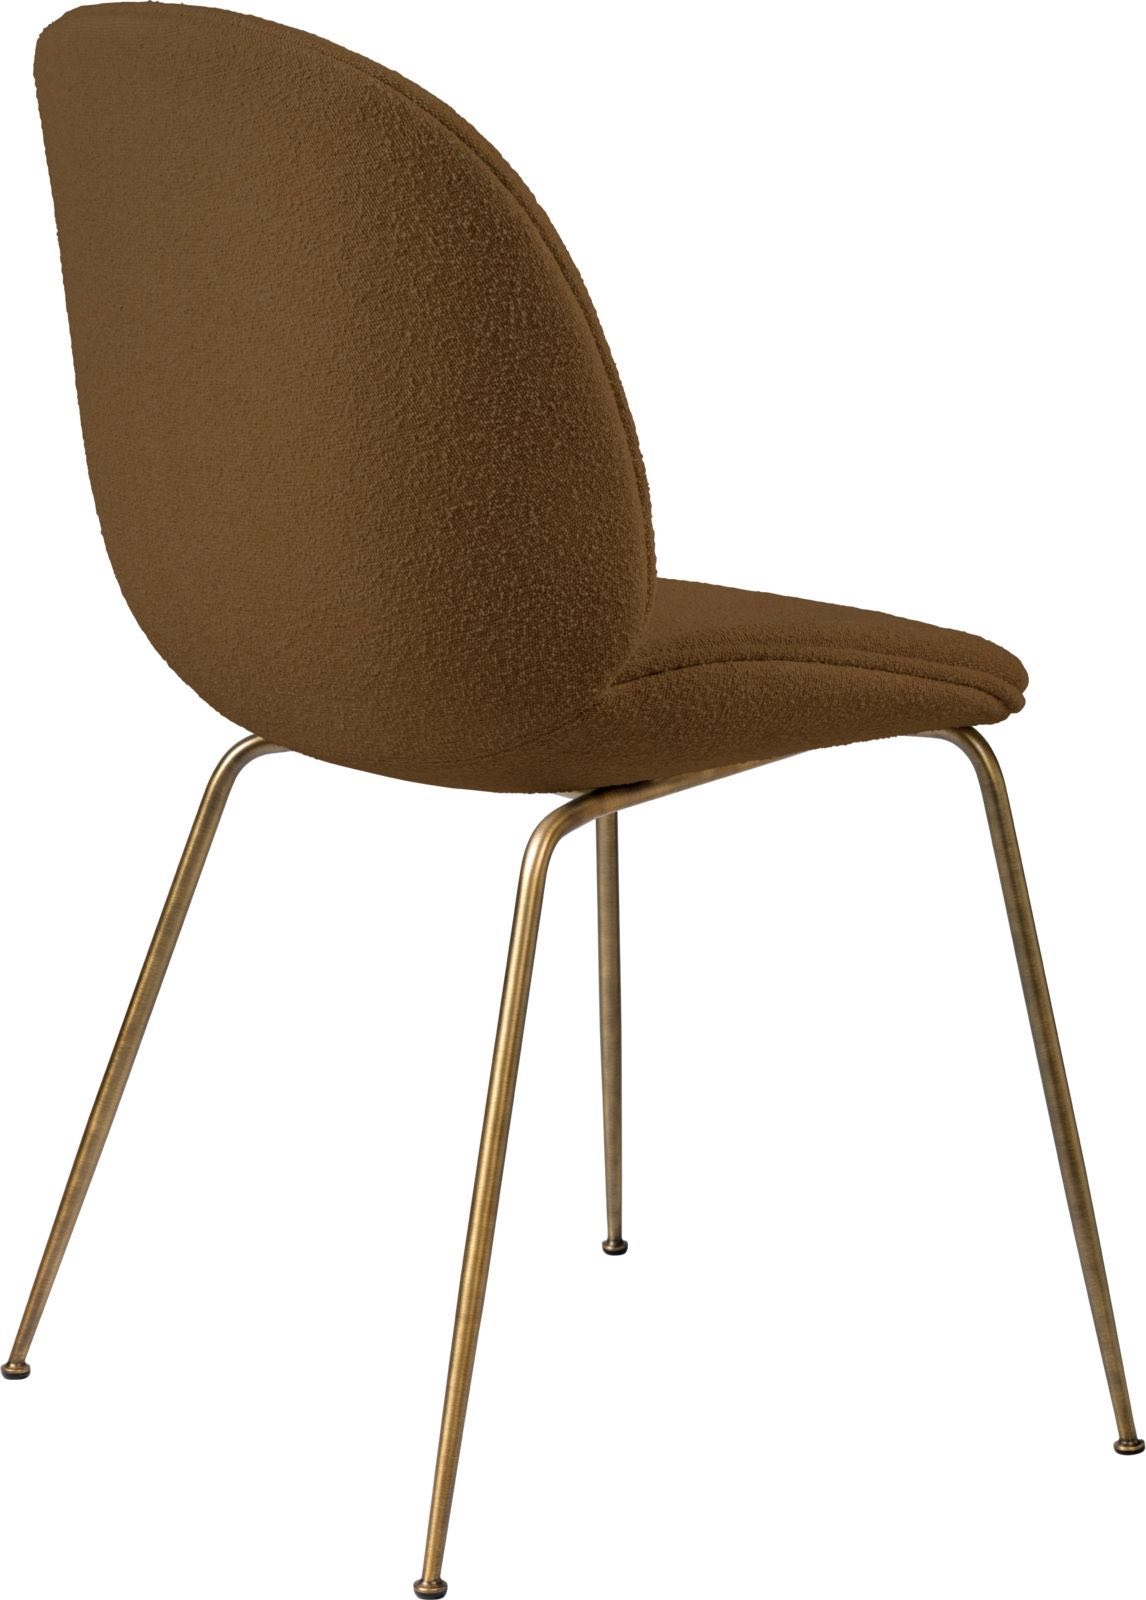 Gubi Beetle Dining Chair - Fully Upholstered - Conic base